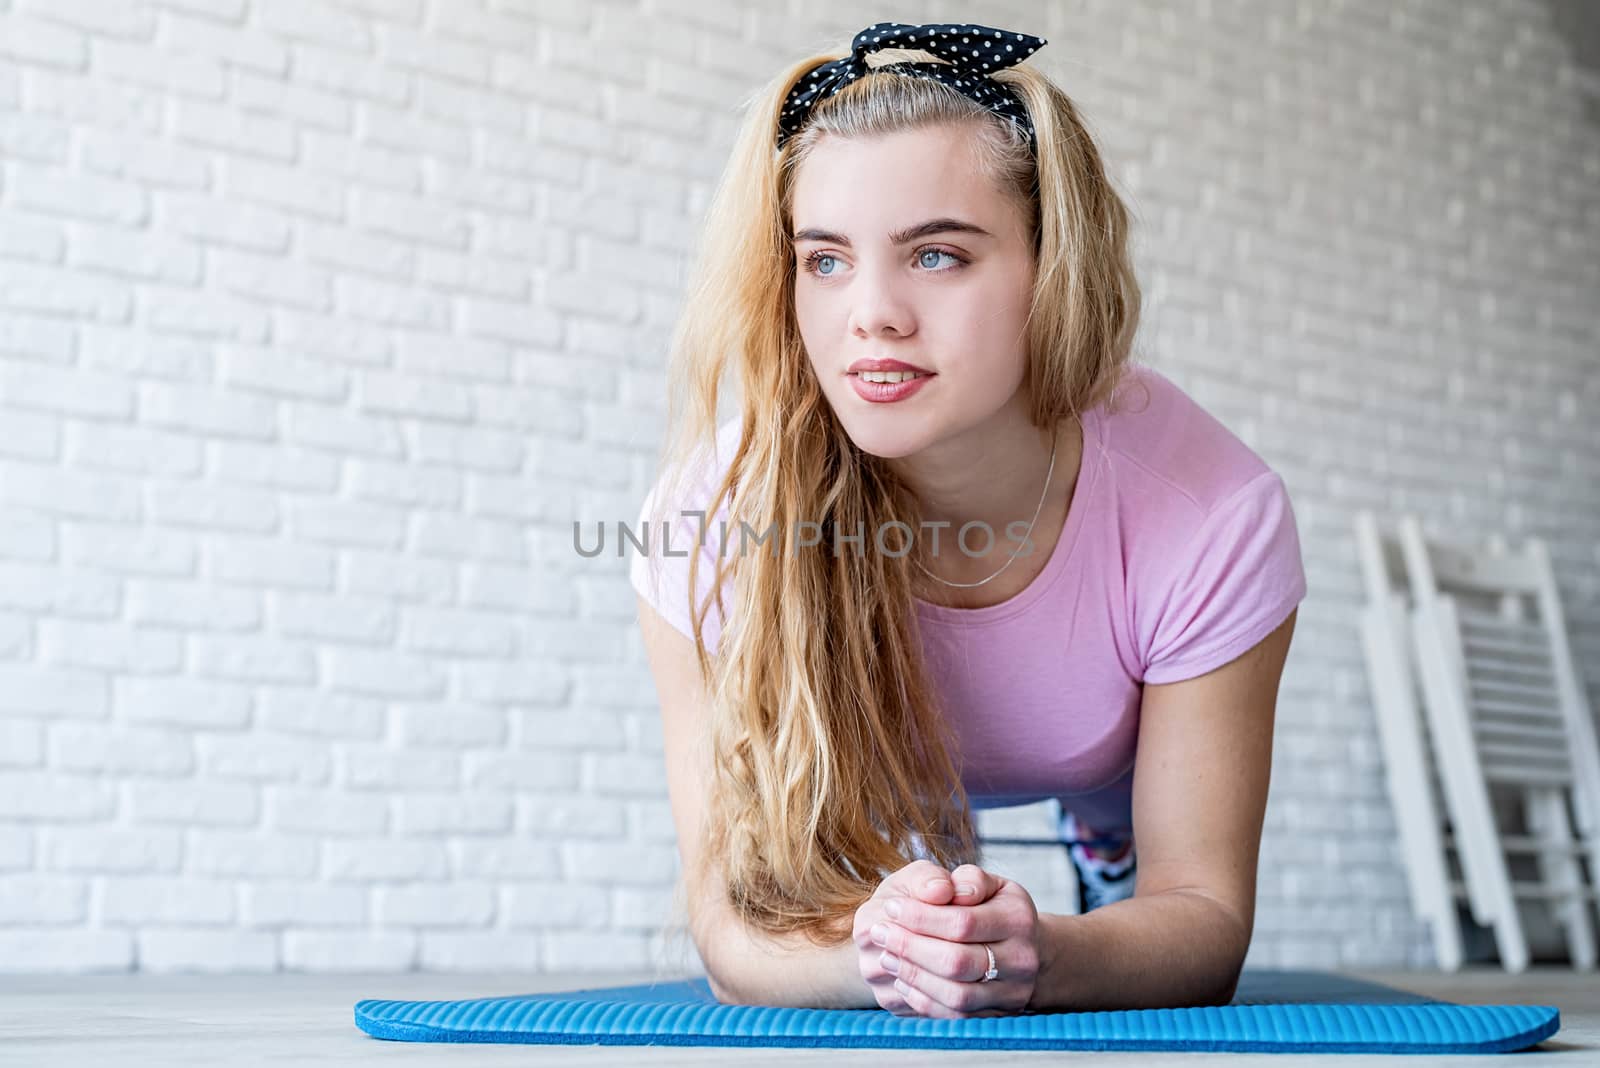 Fitness, sport, training and lifestyle concept. Athletic woman exercising on a fitness mat at home at white brick wall background with copy space